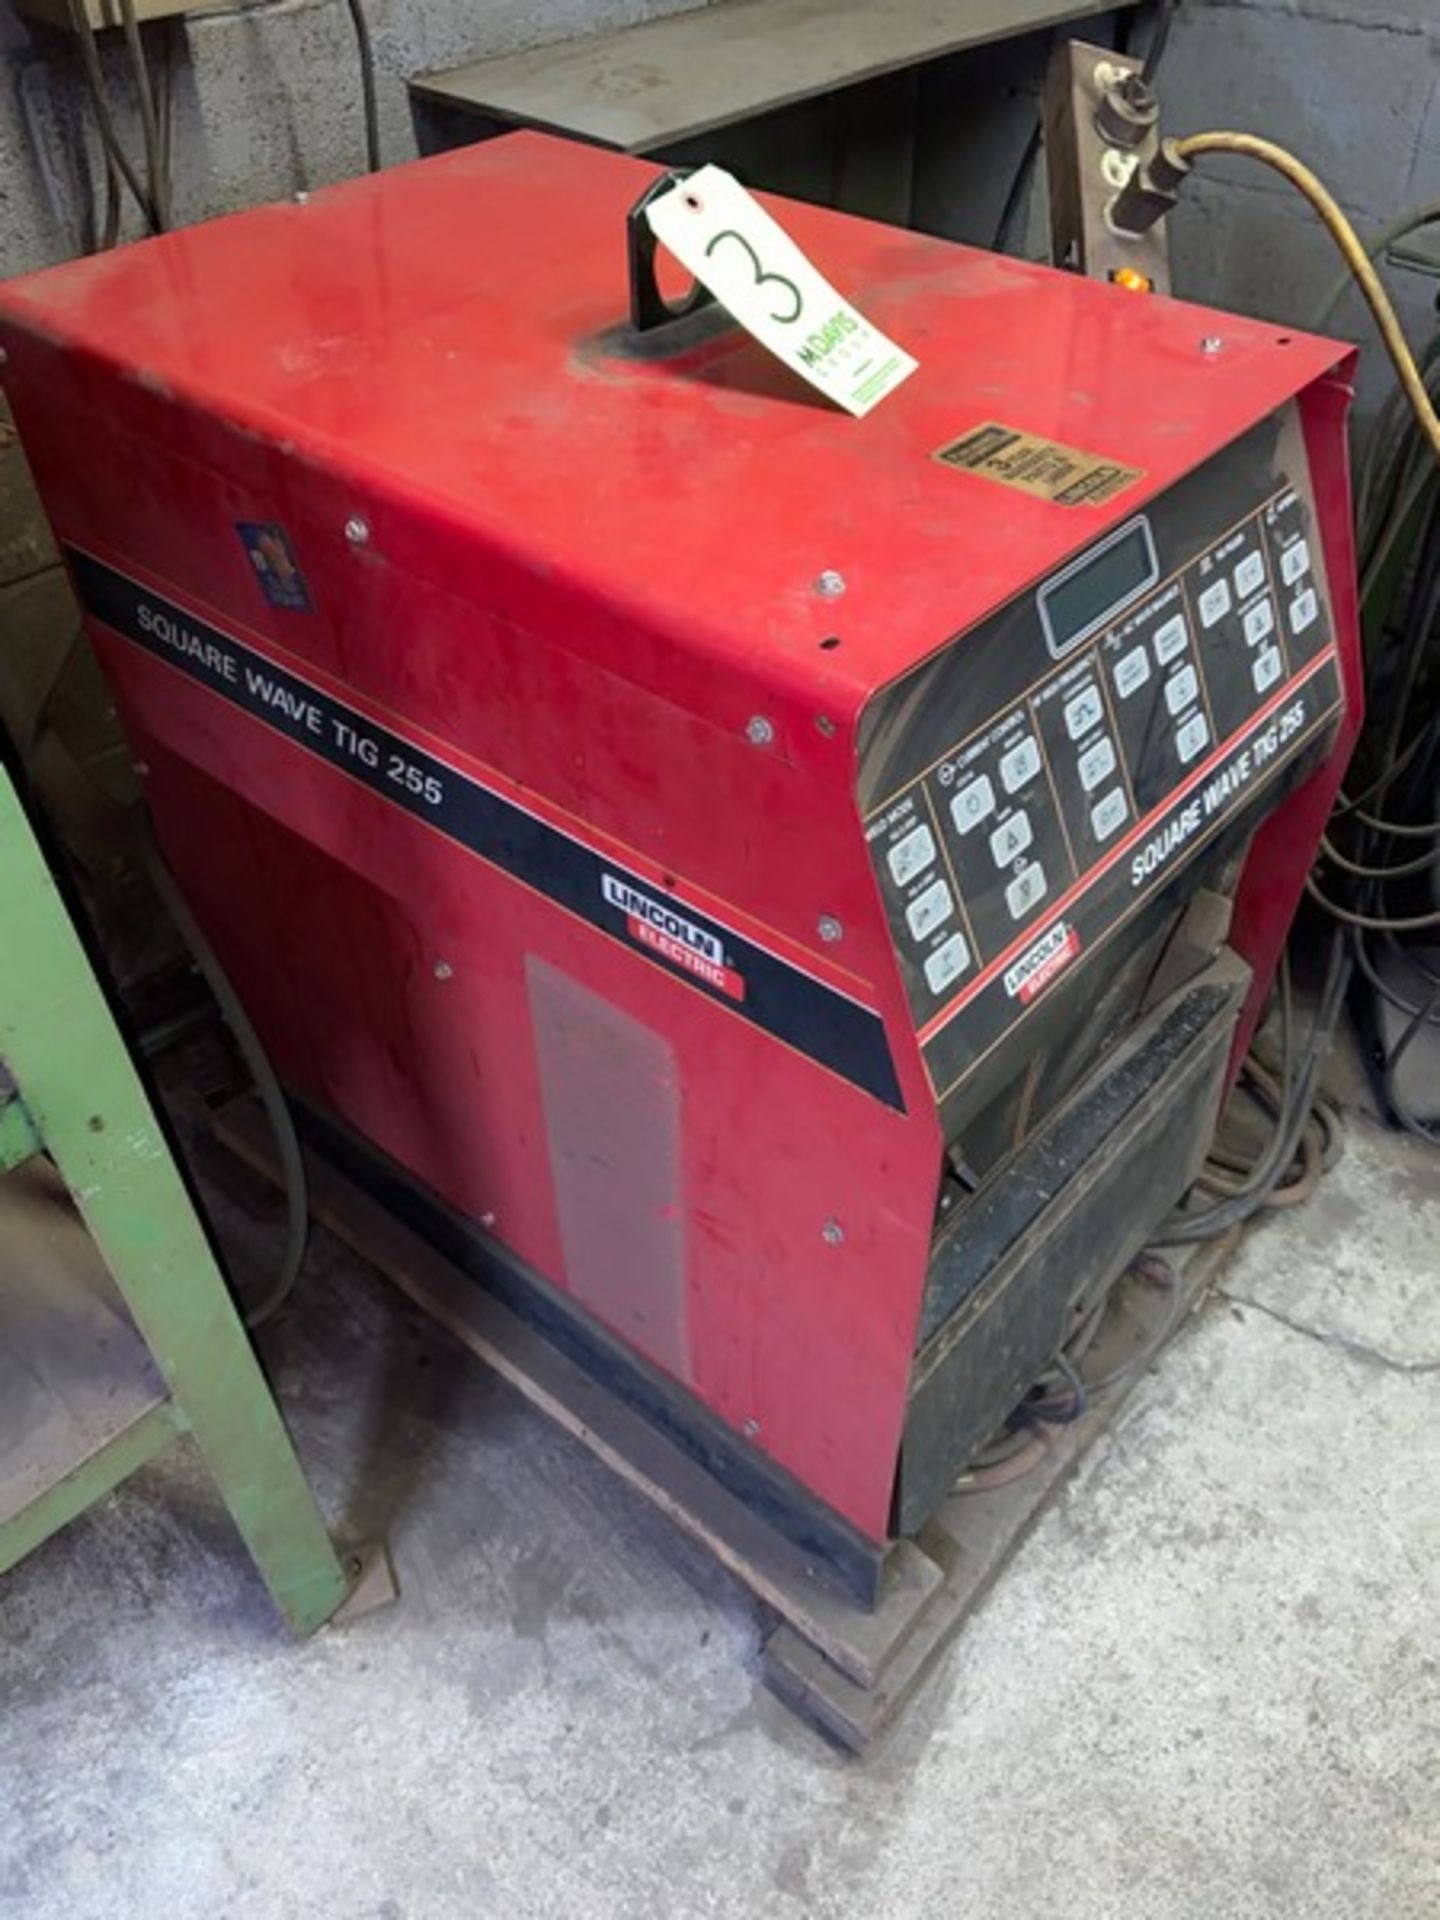 Lincoln Electric Square Wave TIG 255 Welder - Image 3 of 5